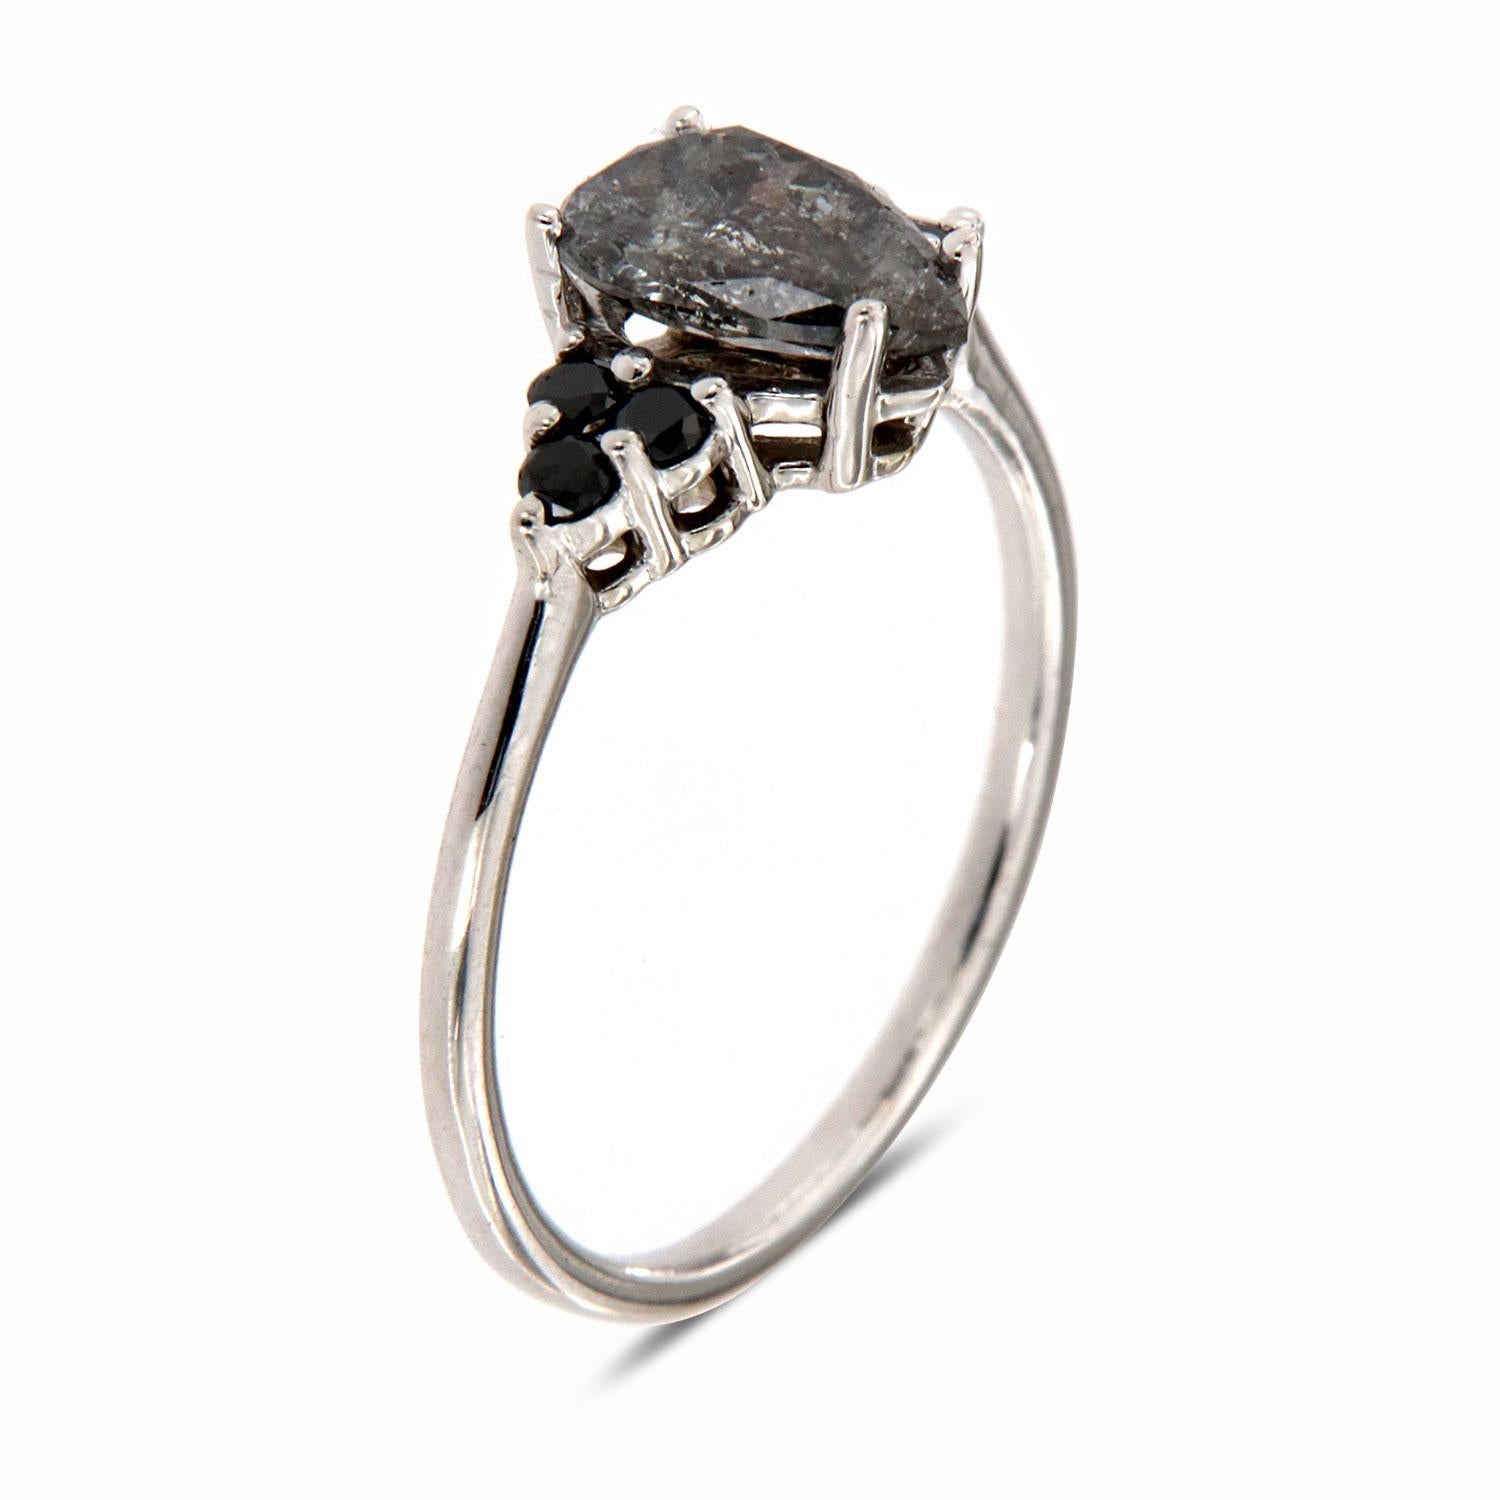 This Earthy design ring features six (6) Round-shaped Black Diamonds prong set on top of a 1.3 MM wide band. In the center is placed a 0.95 carat ( a touch less than 1 carat) Pear shape Salt and Pepper diamond. This delicate vintage ring represents